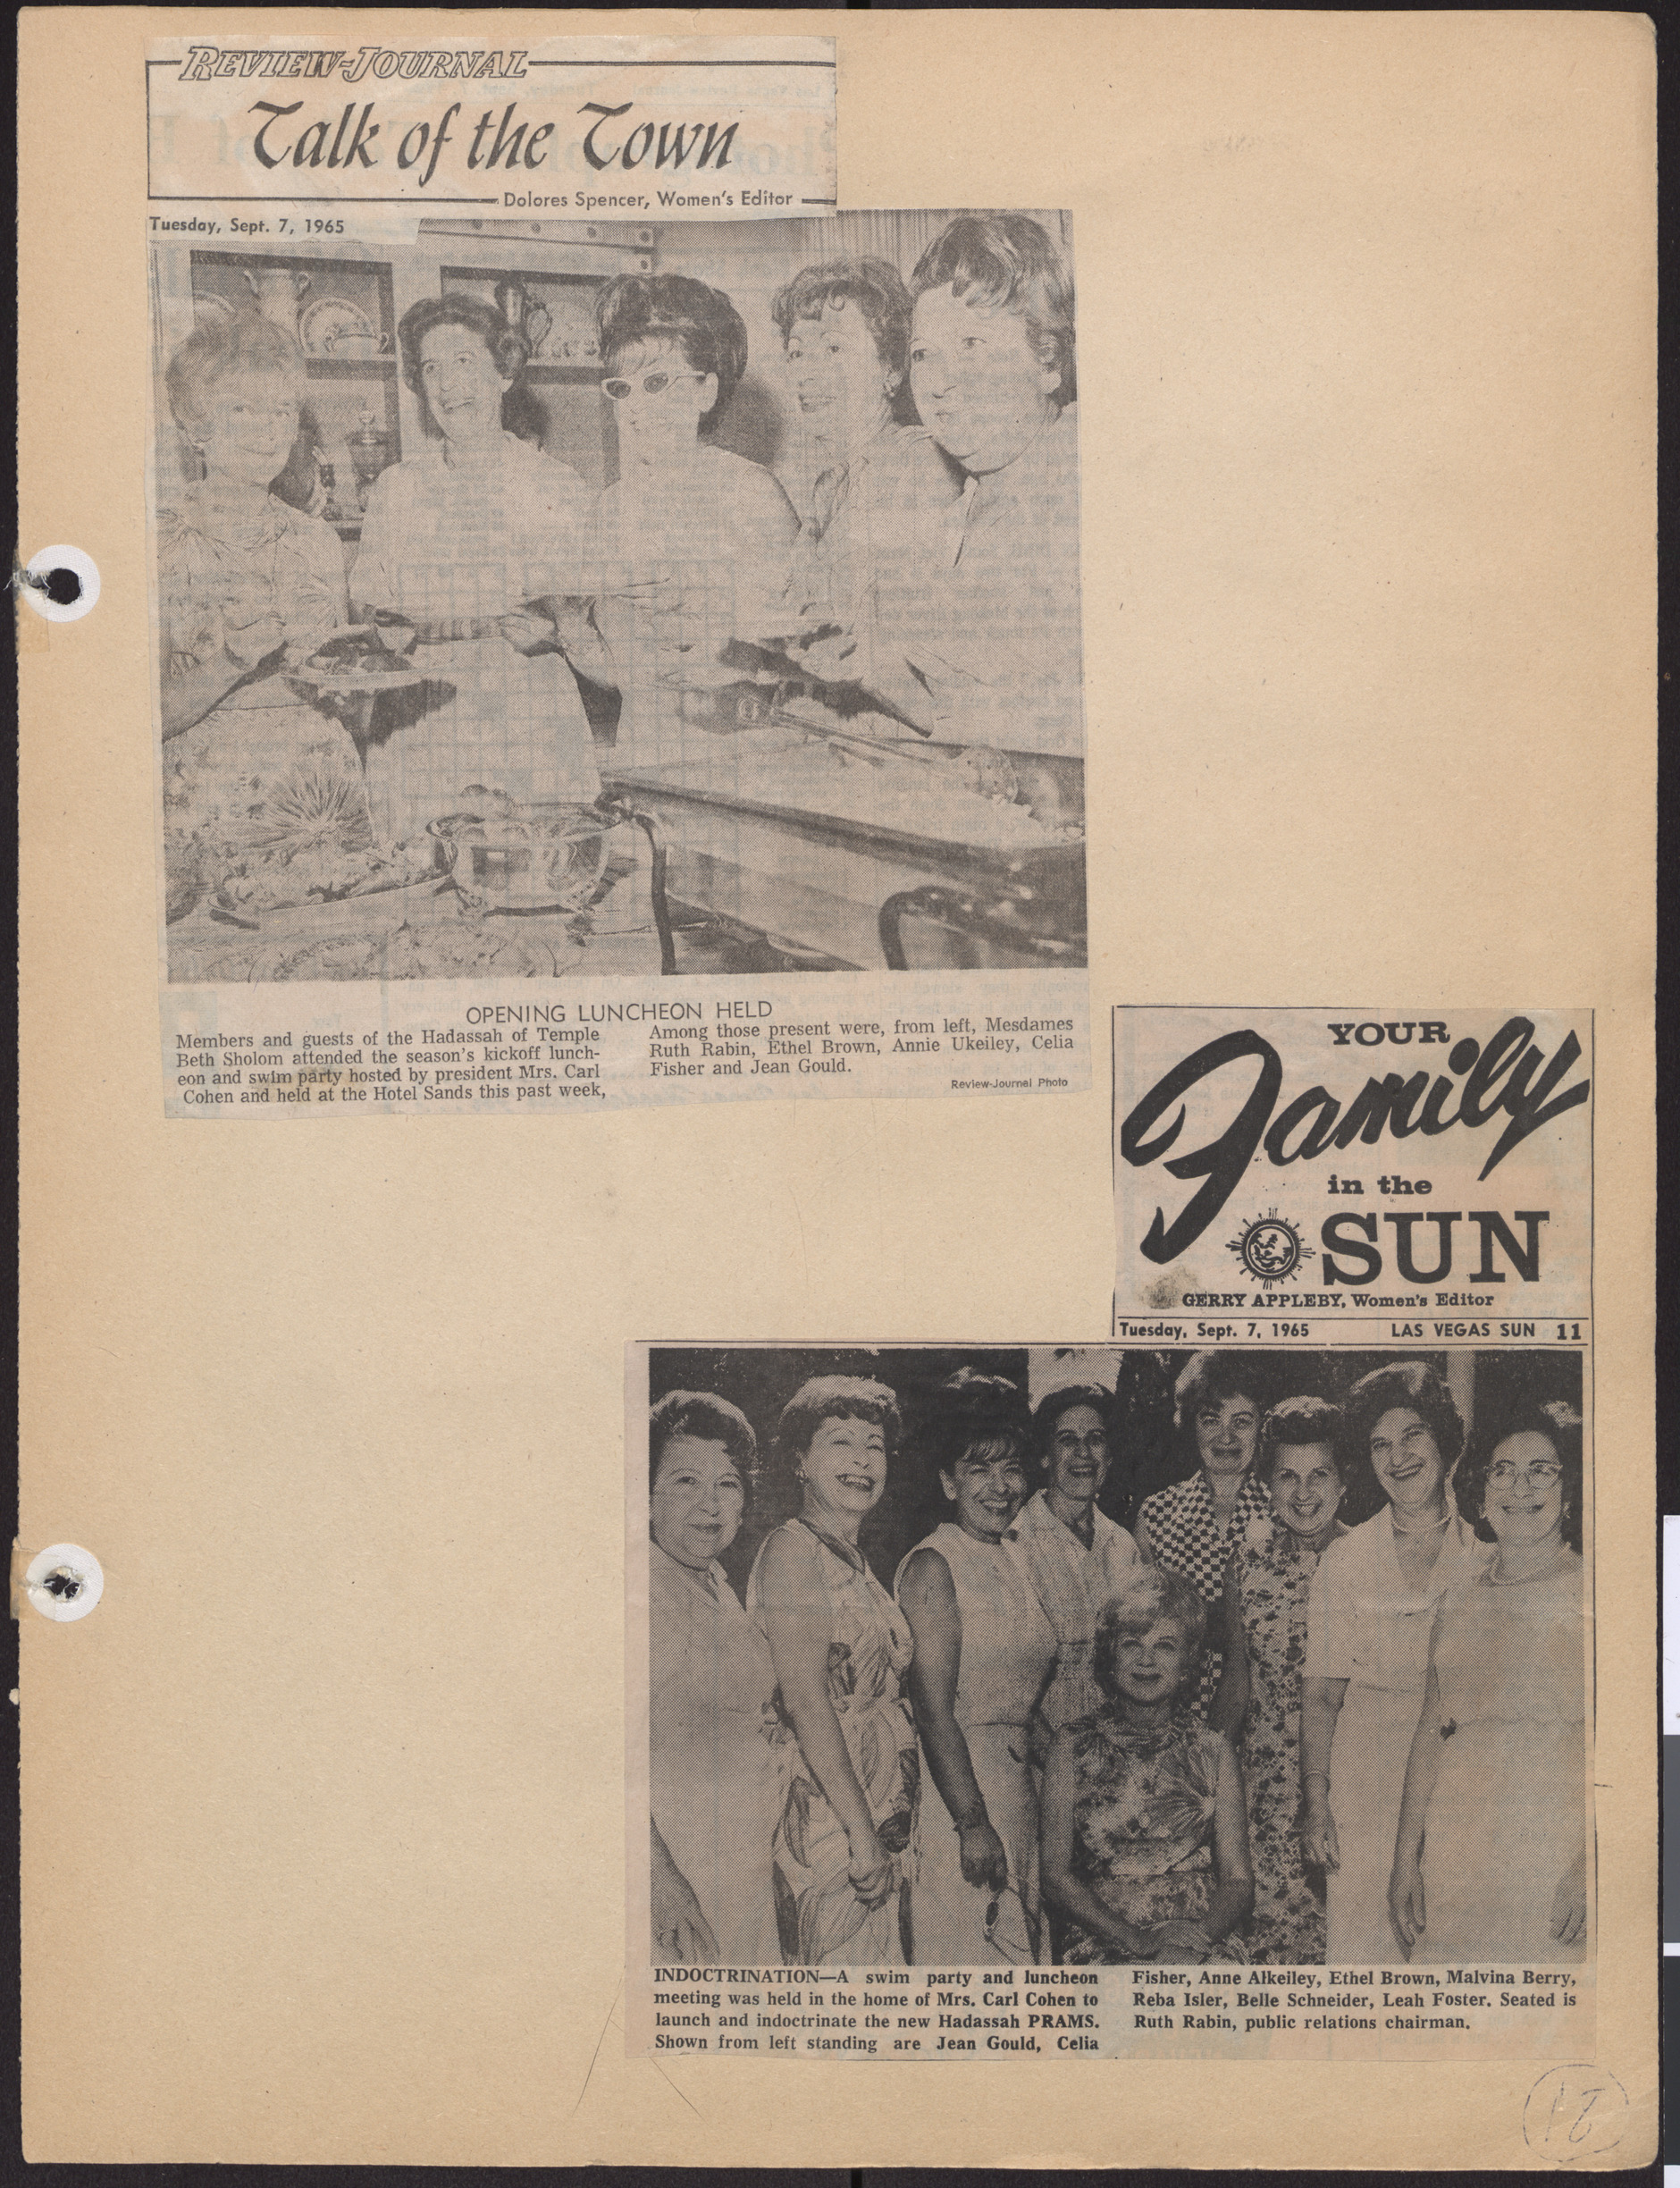 Newspaper clippings, Talk of the Town, Opening Luncheon Held, Las Vegas Review-Journal, September 7, 1965, and Indoctrination, Las Vegas Sun, September 7, 1965